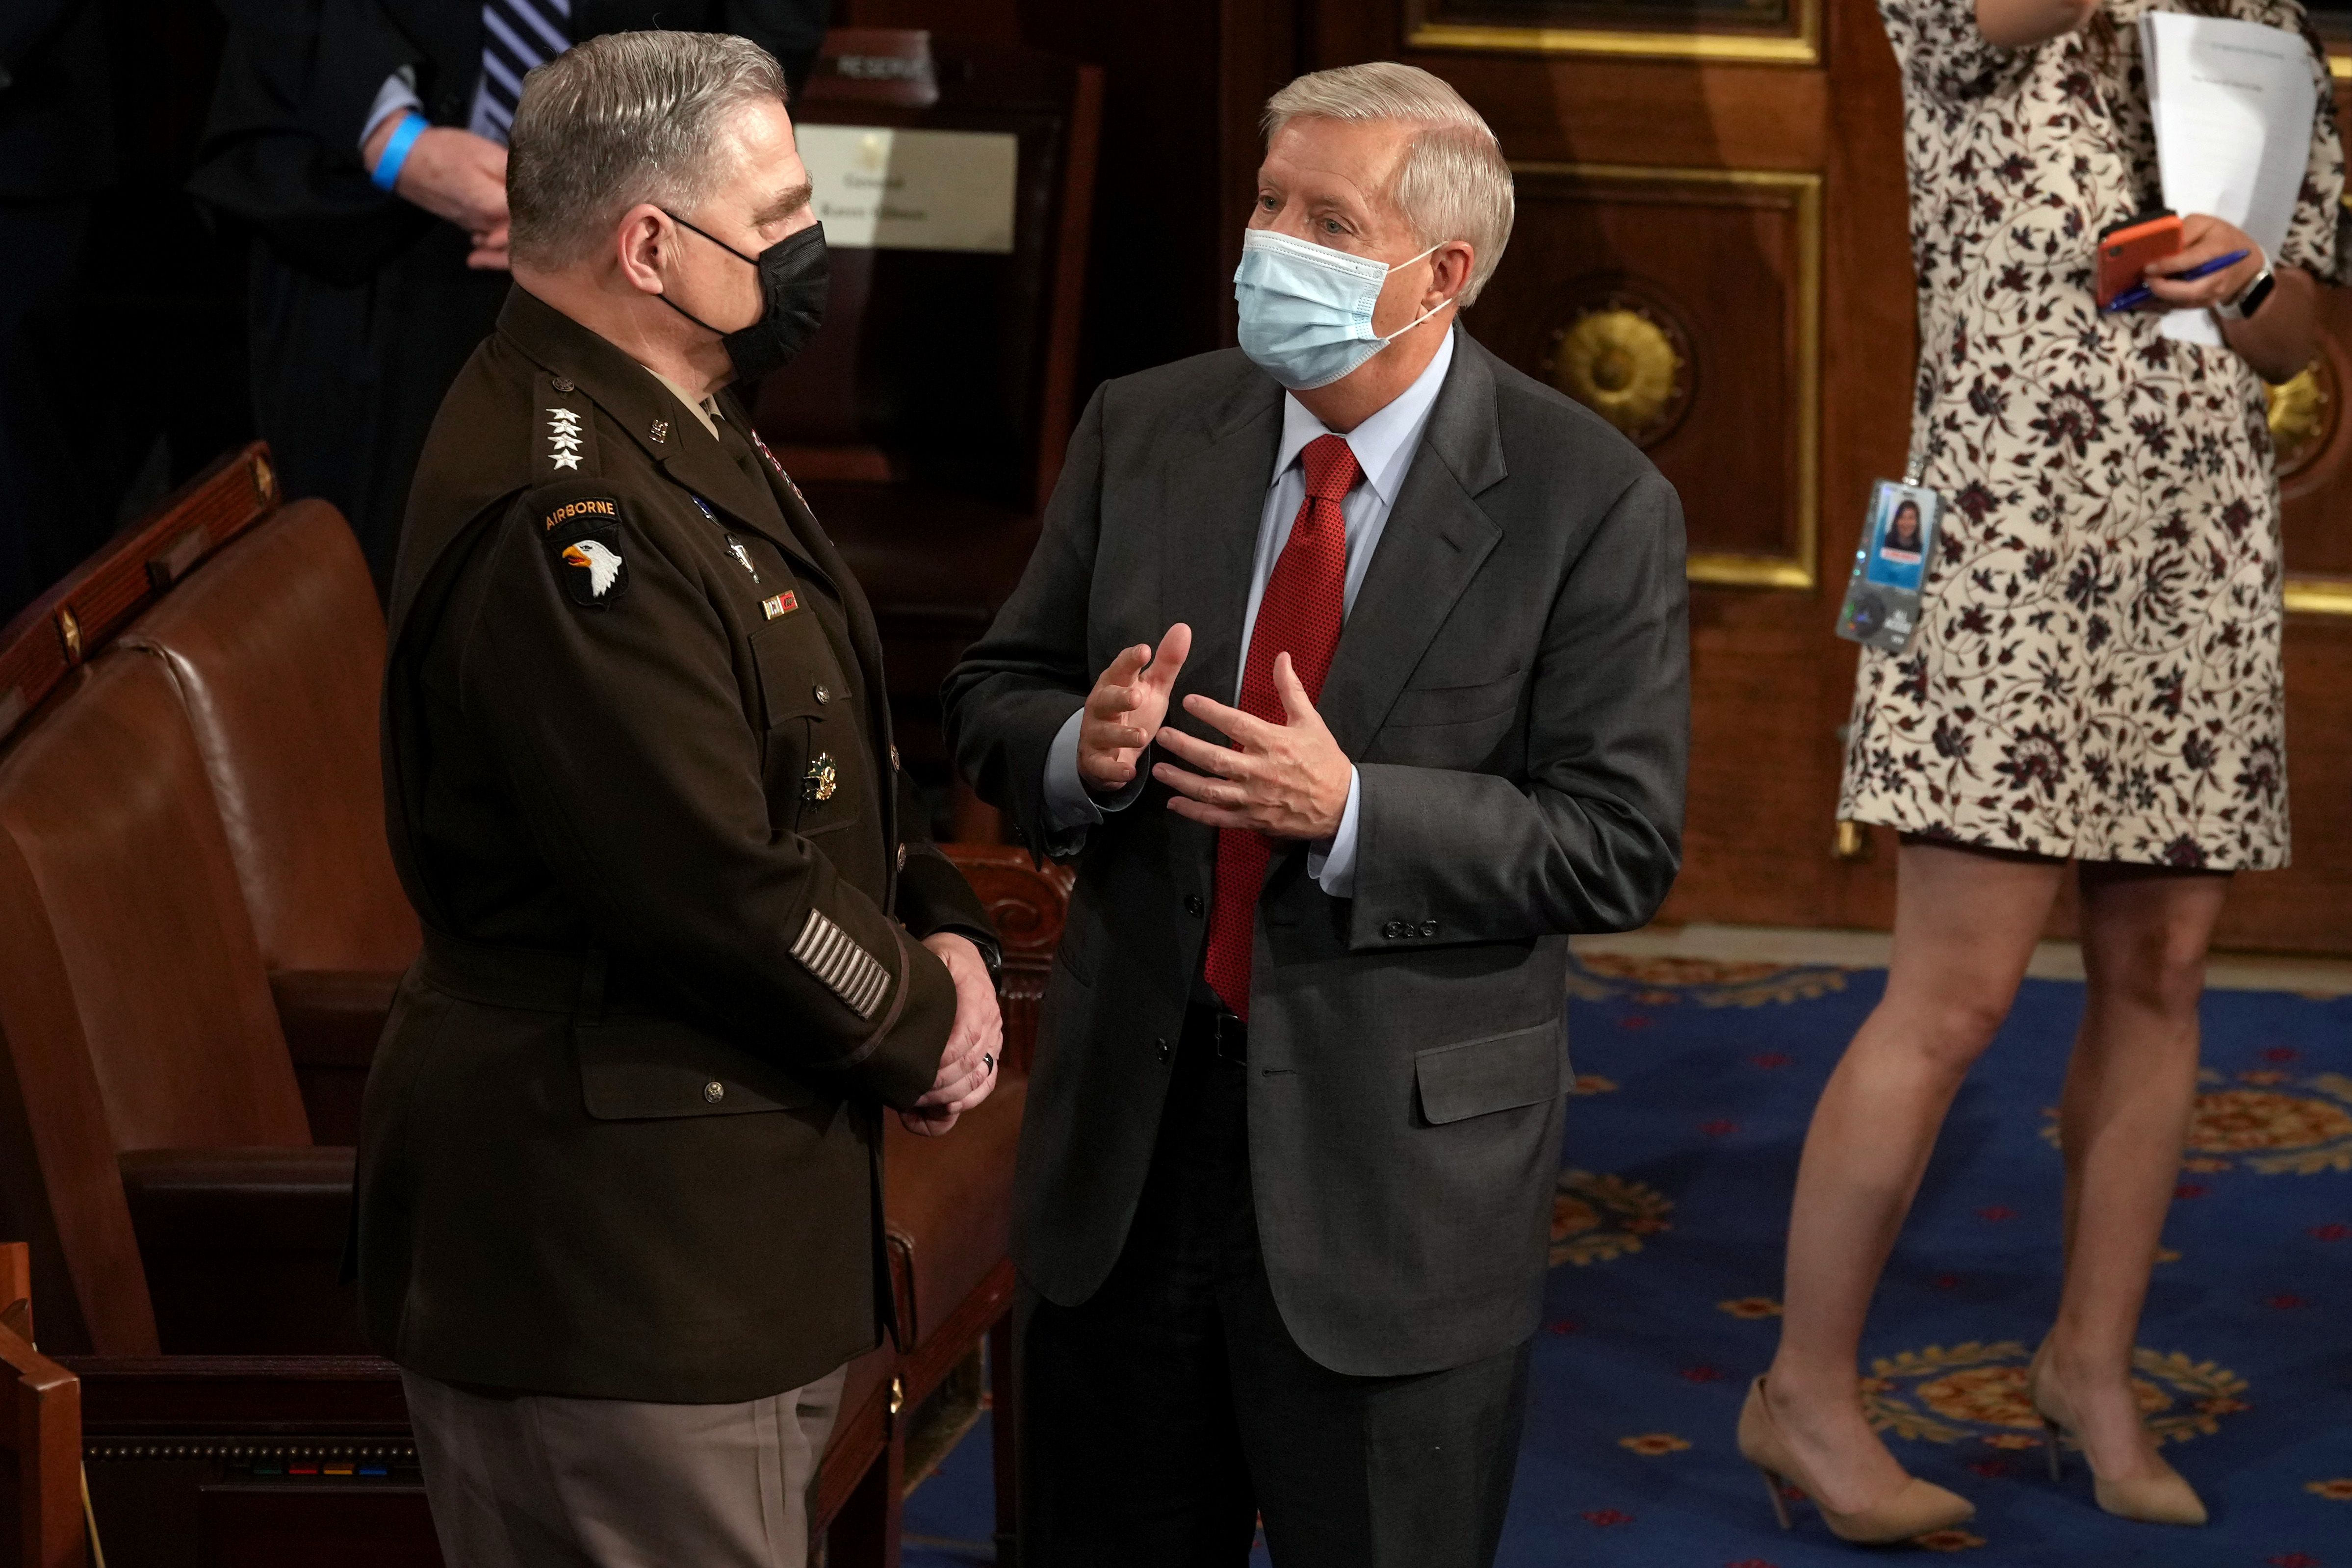 Senator Lindsey Graham, a Republican from South Carolina, right, speaks with Mark Milley, chairman of the joint chiefs of staff, before a joint session of Congress